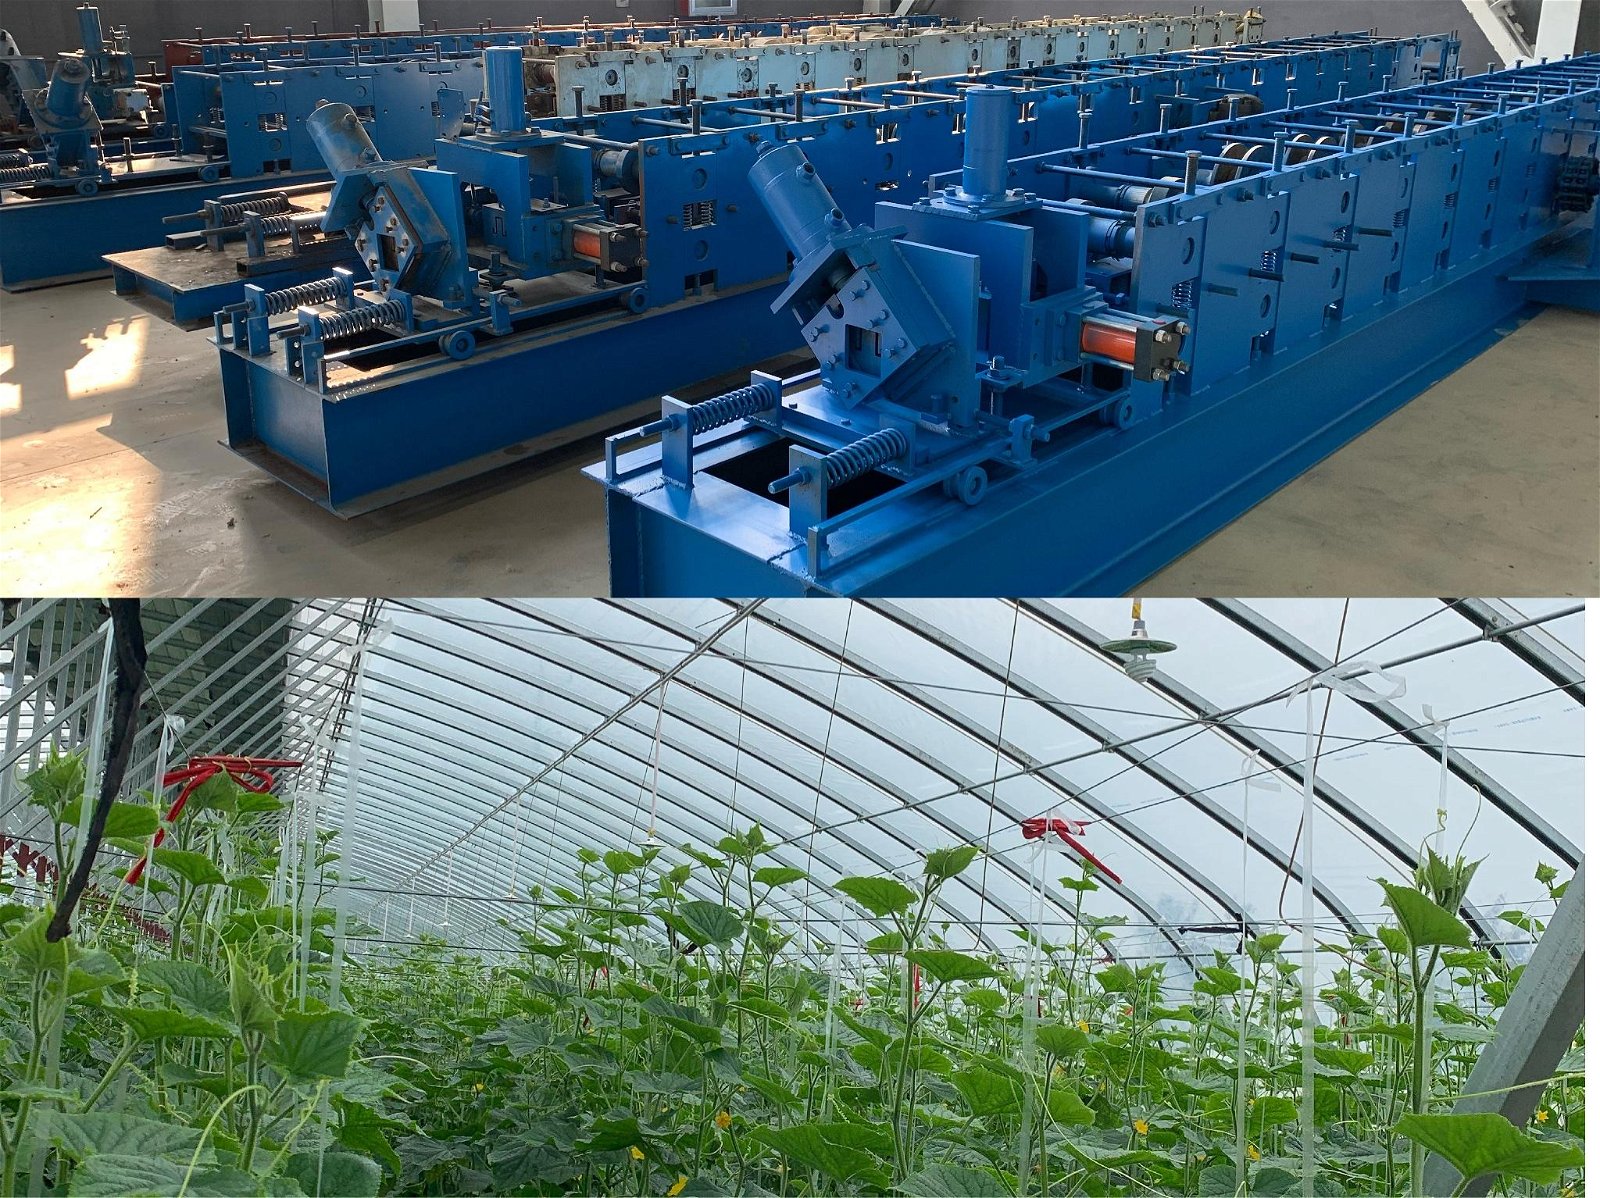 Cavey special steel equipment production greenhouses a few words 4